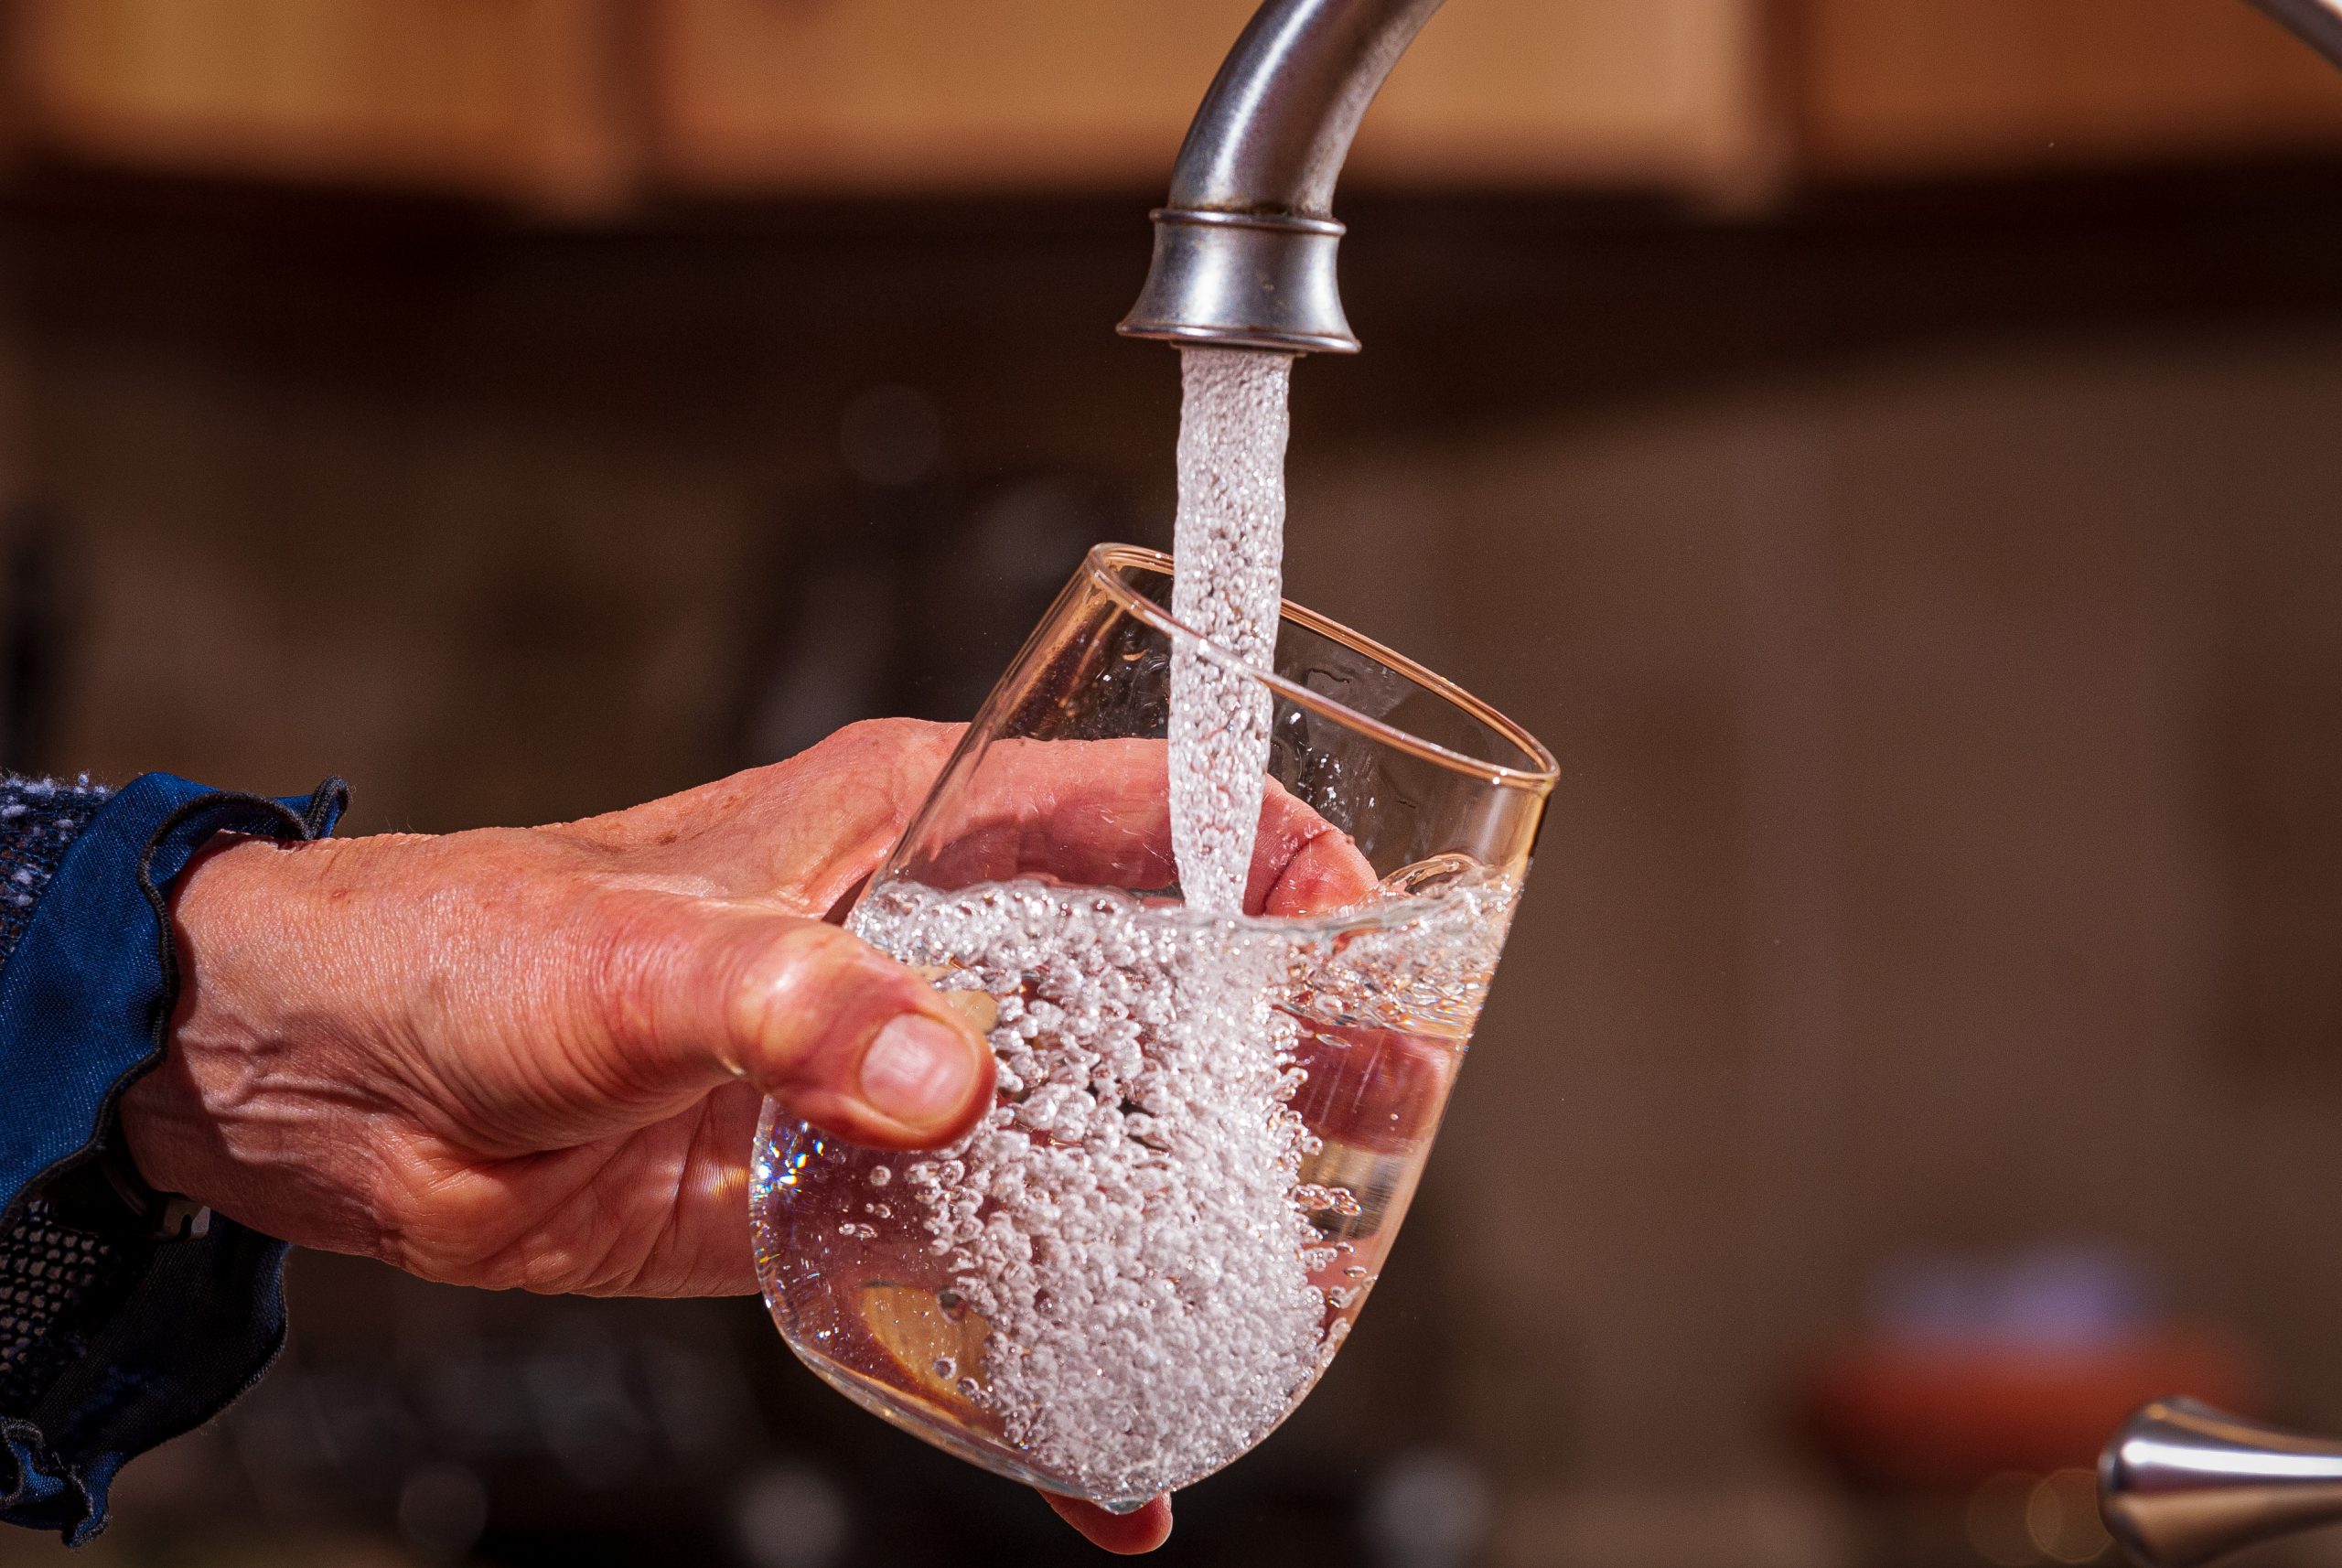 Is it harmful to drink tap water in the Netherlands?